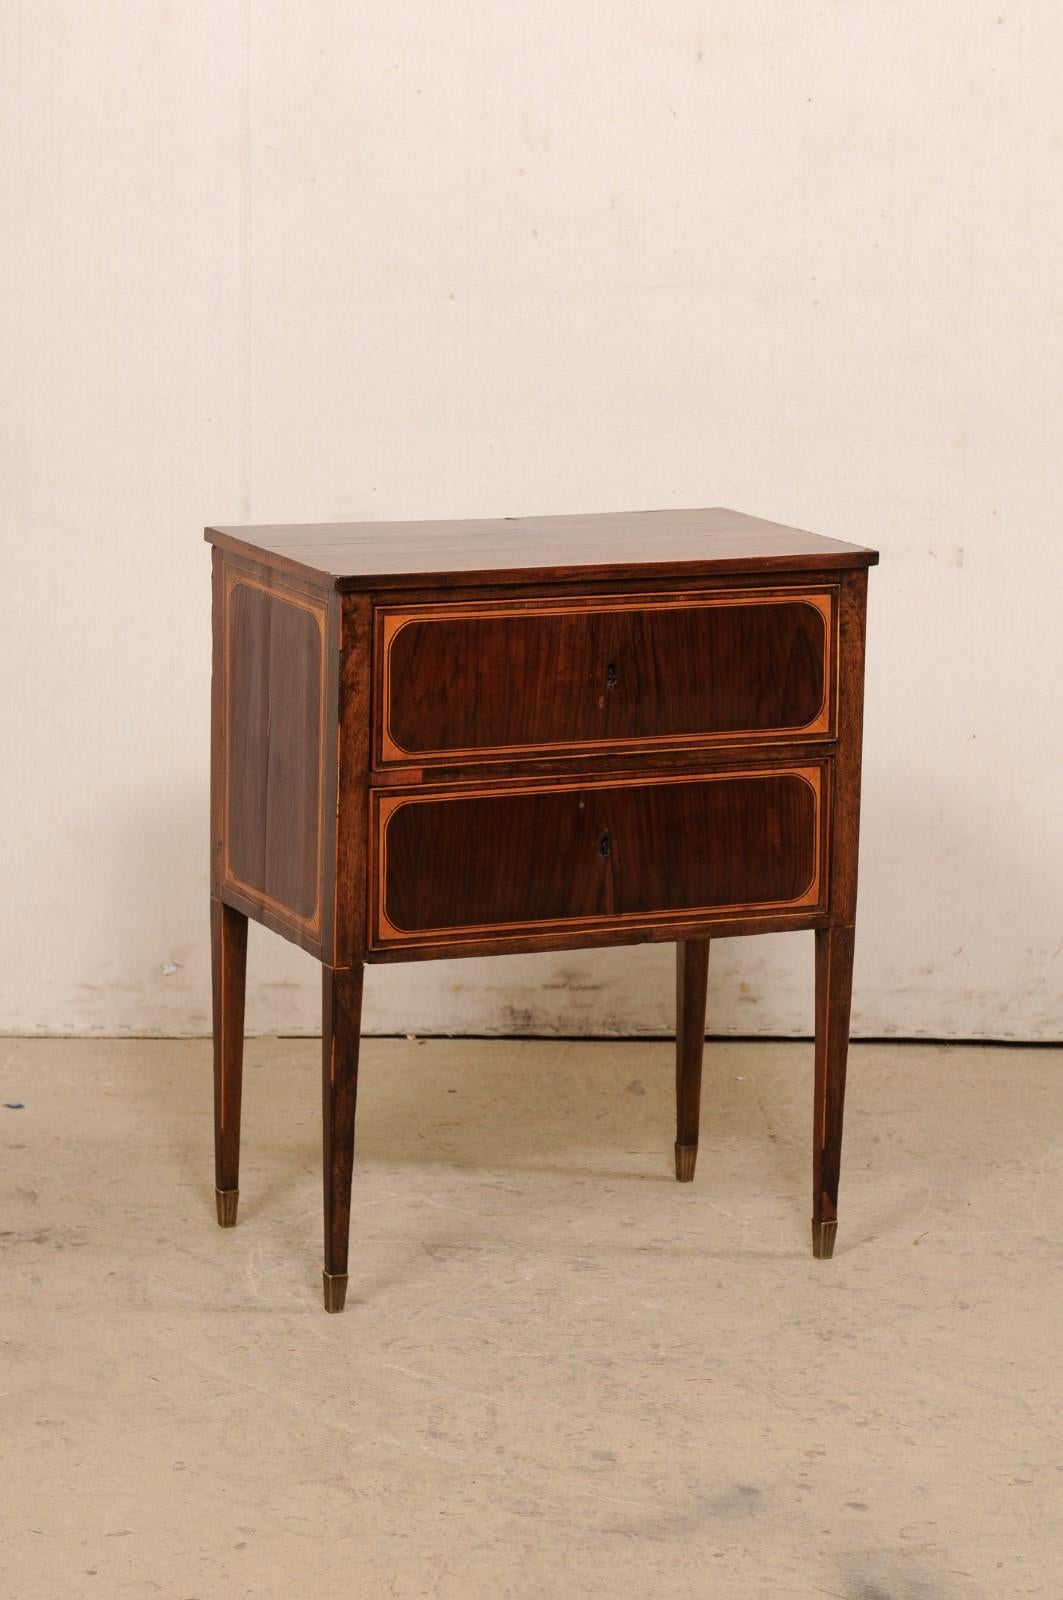 An Italian raised side chest with drawers from the 19th century. This antique end table from Italy has been designed with very clean lines and minimalist feel. The rectangular-shaped case houses a pair of stacked drawers, has clean/liner skirting,